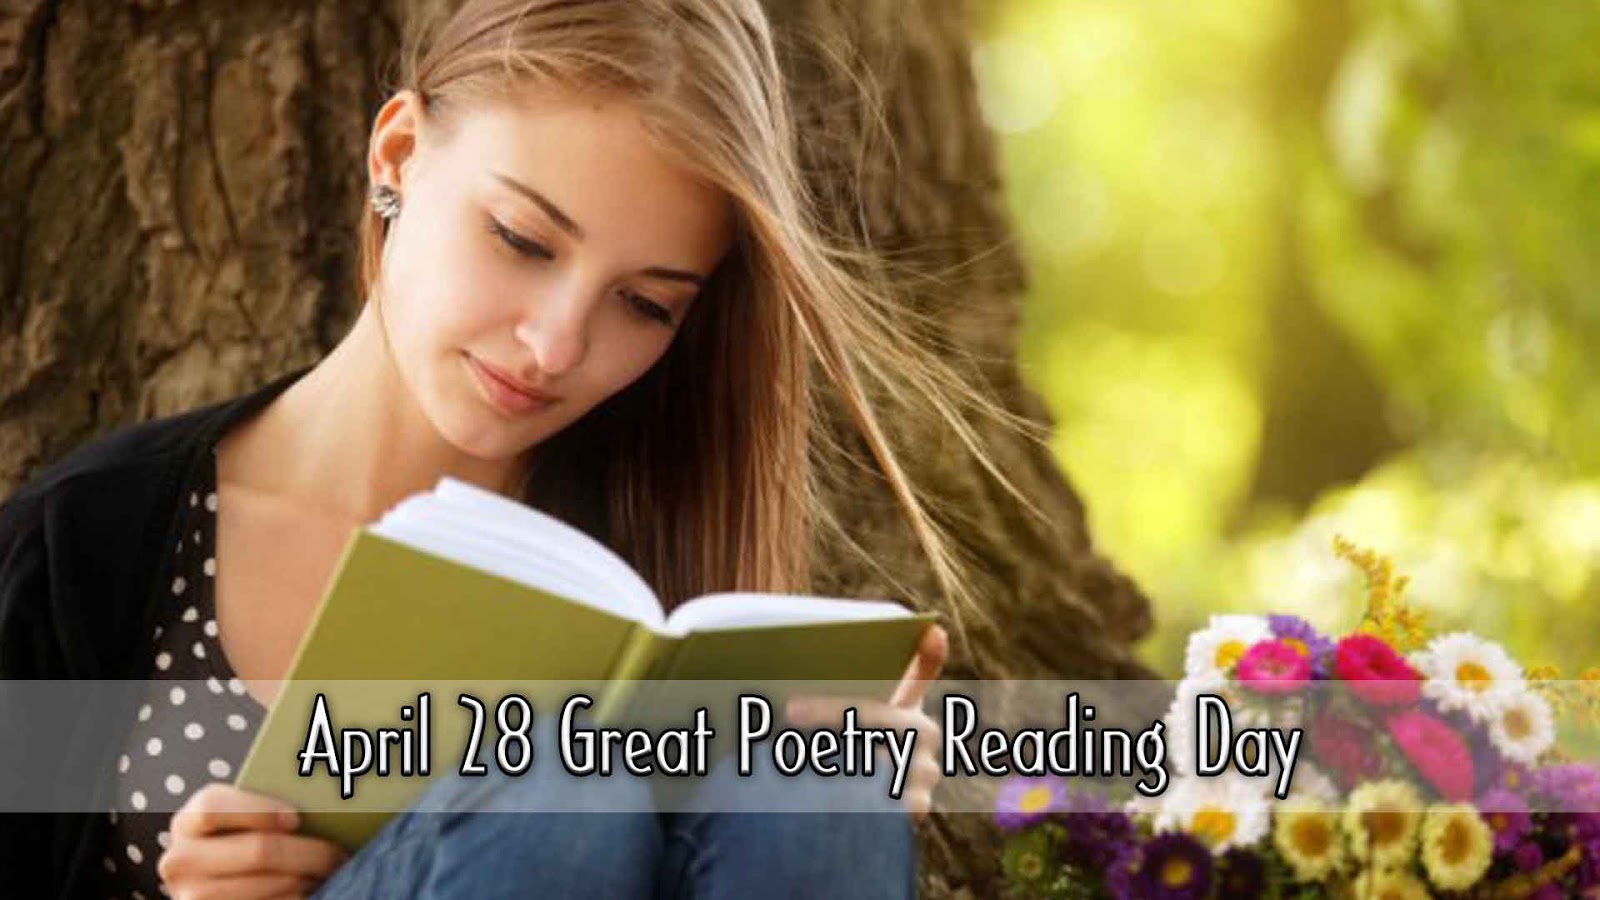 Great Poetry Reading Day